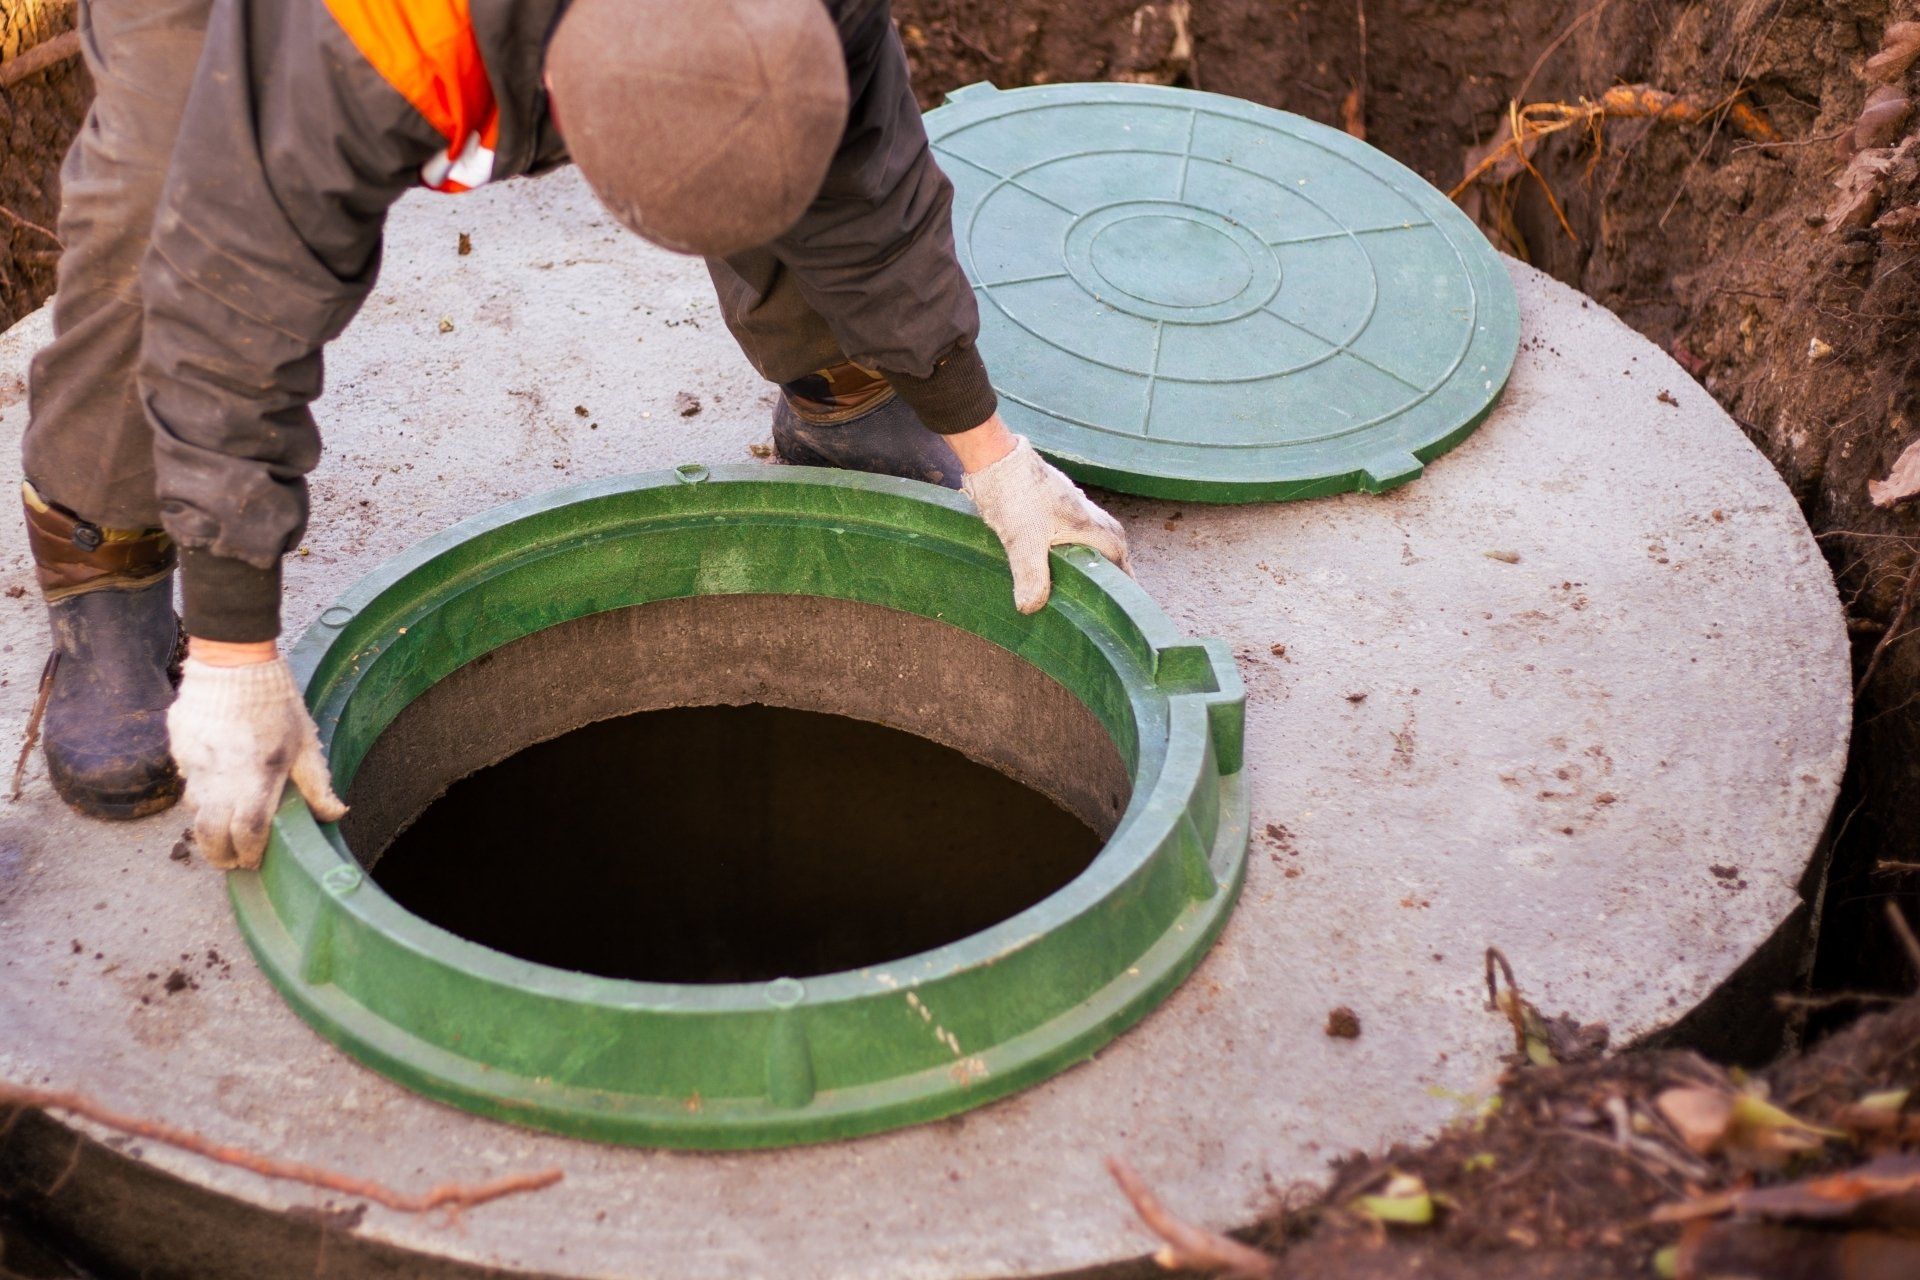 the builder installs a manhole on a concrete sewer well.